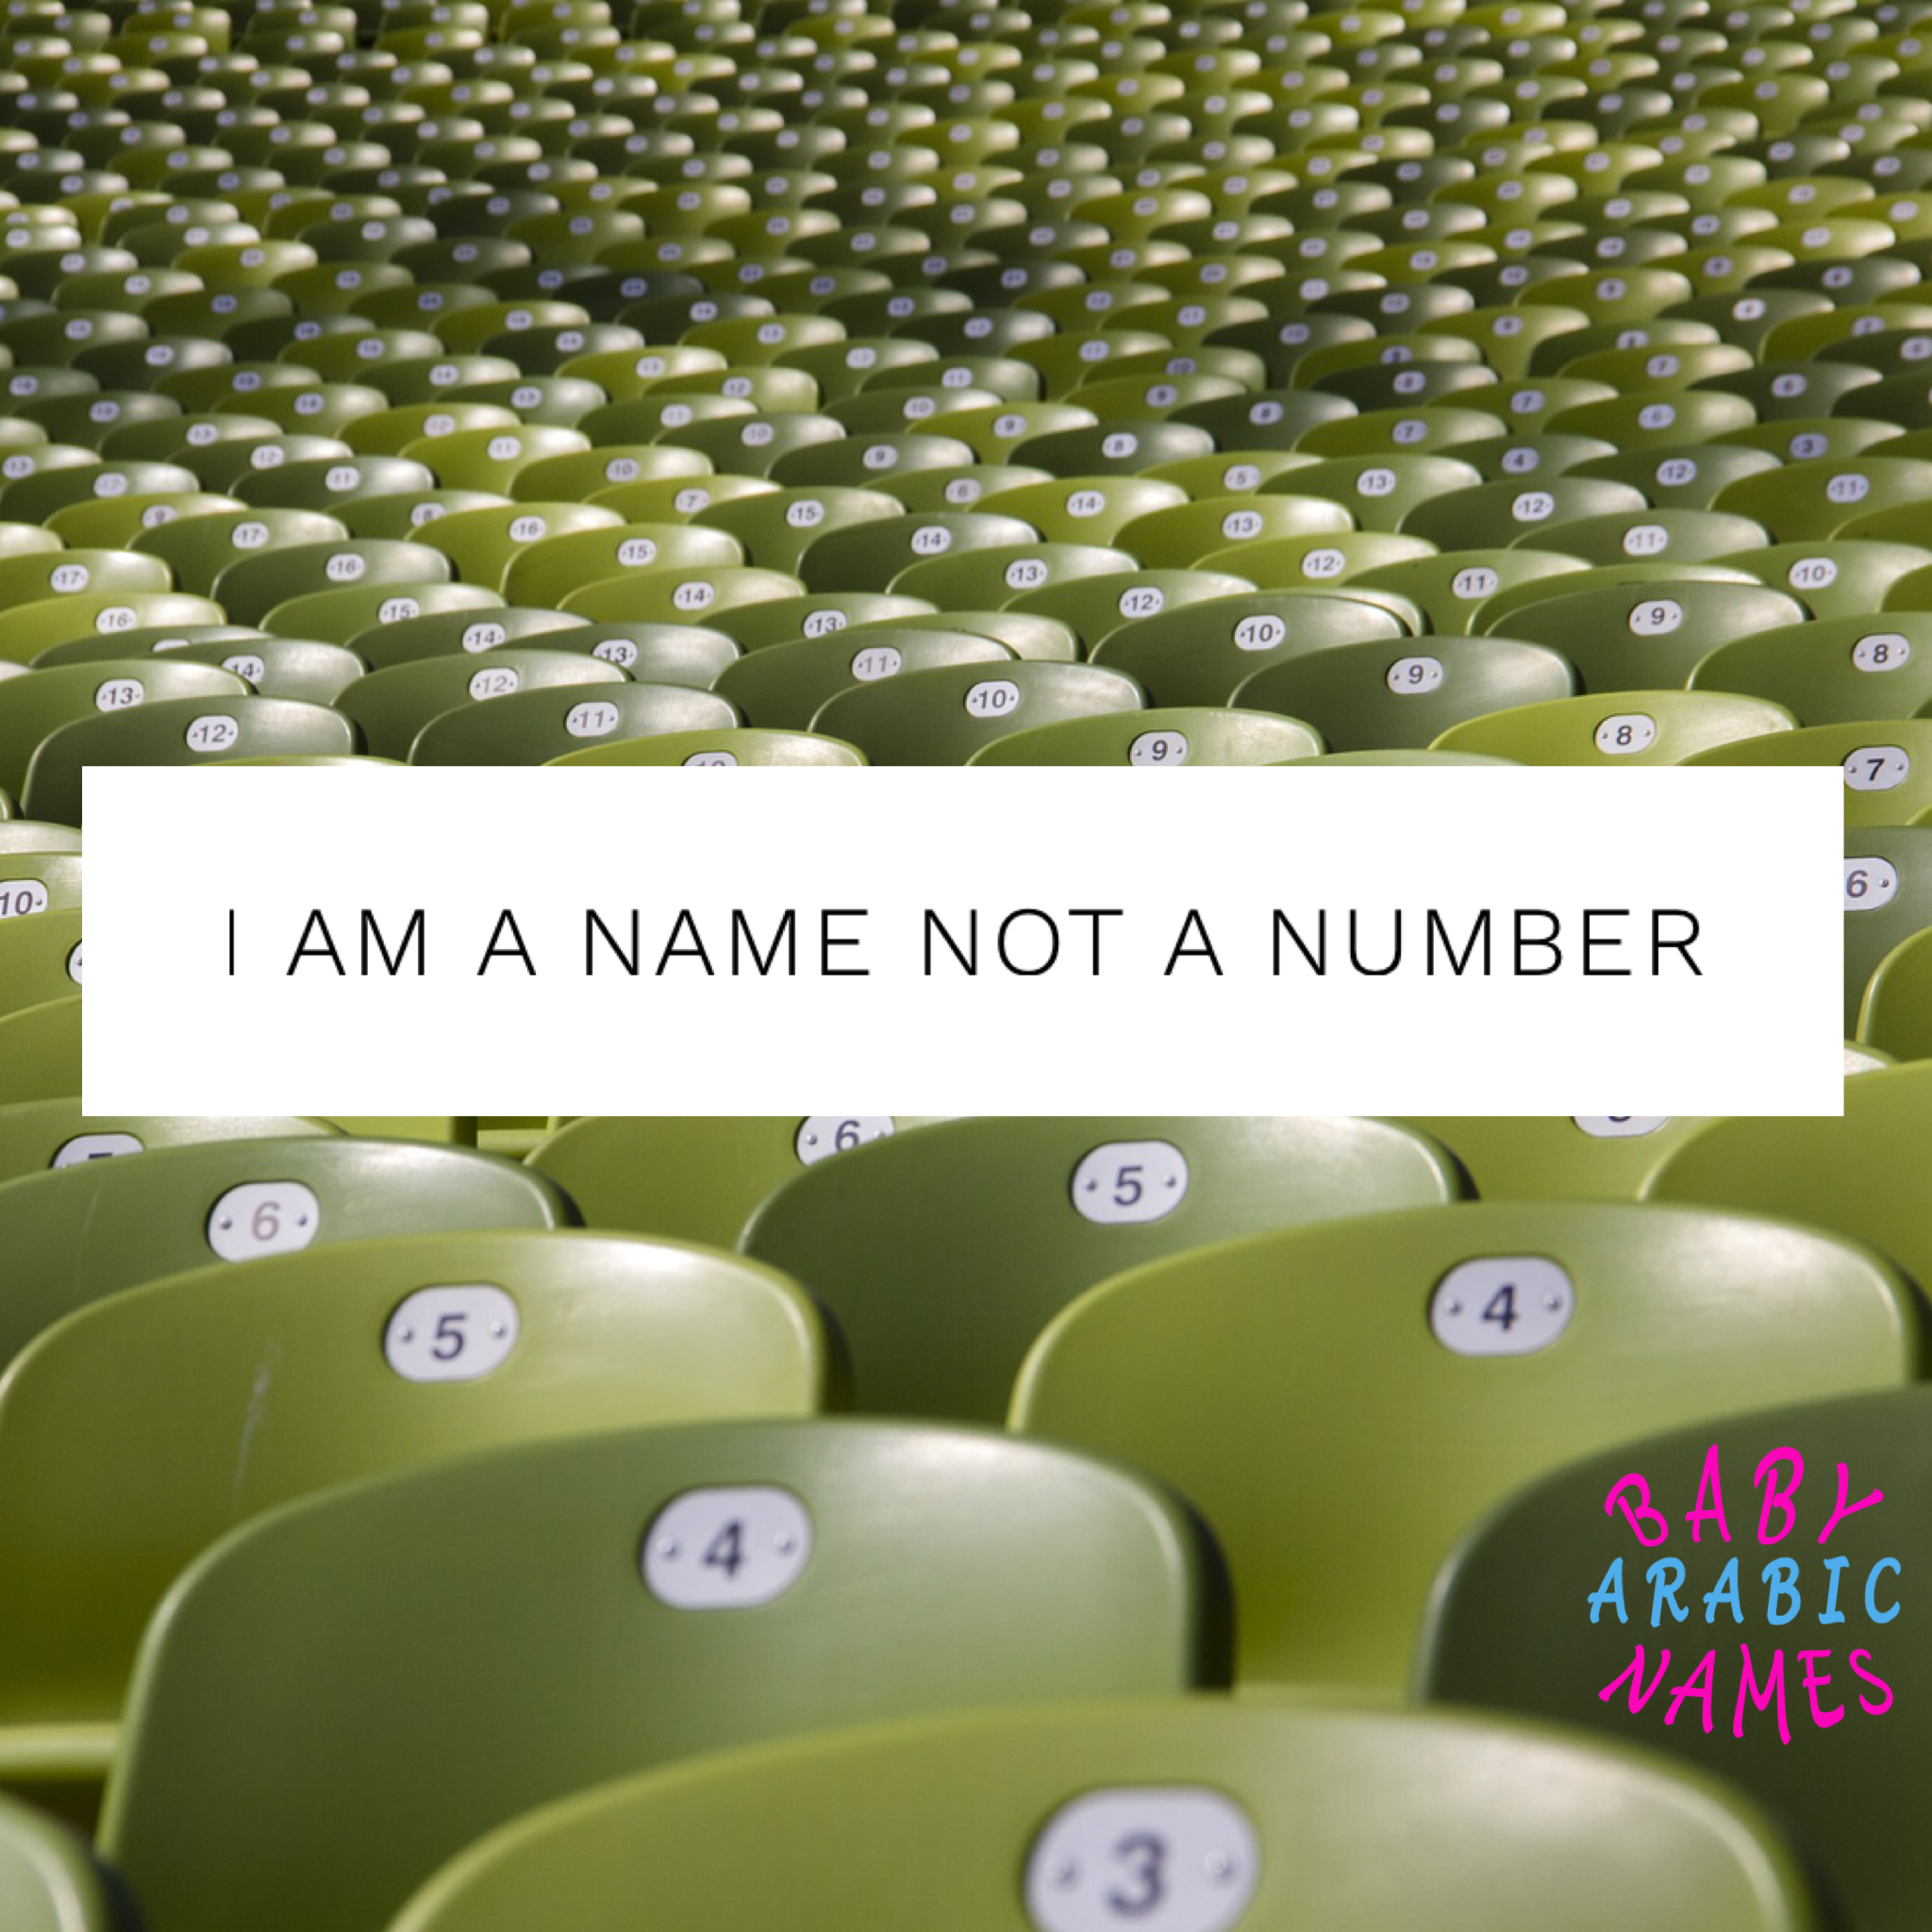 I am a name not a number